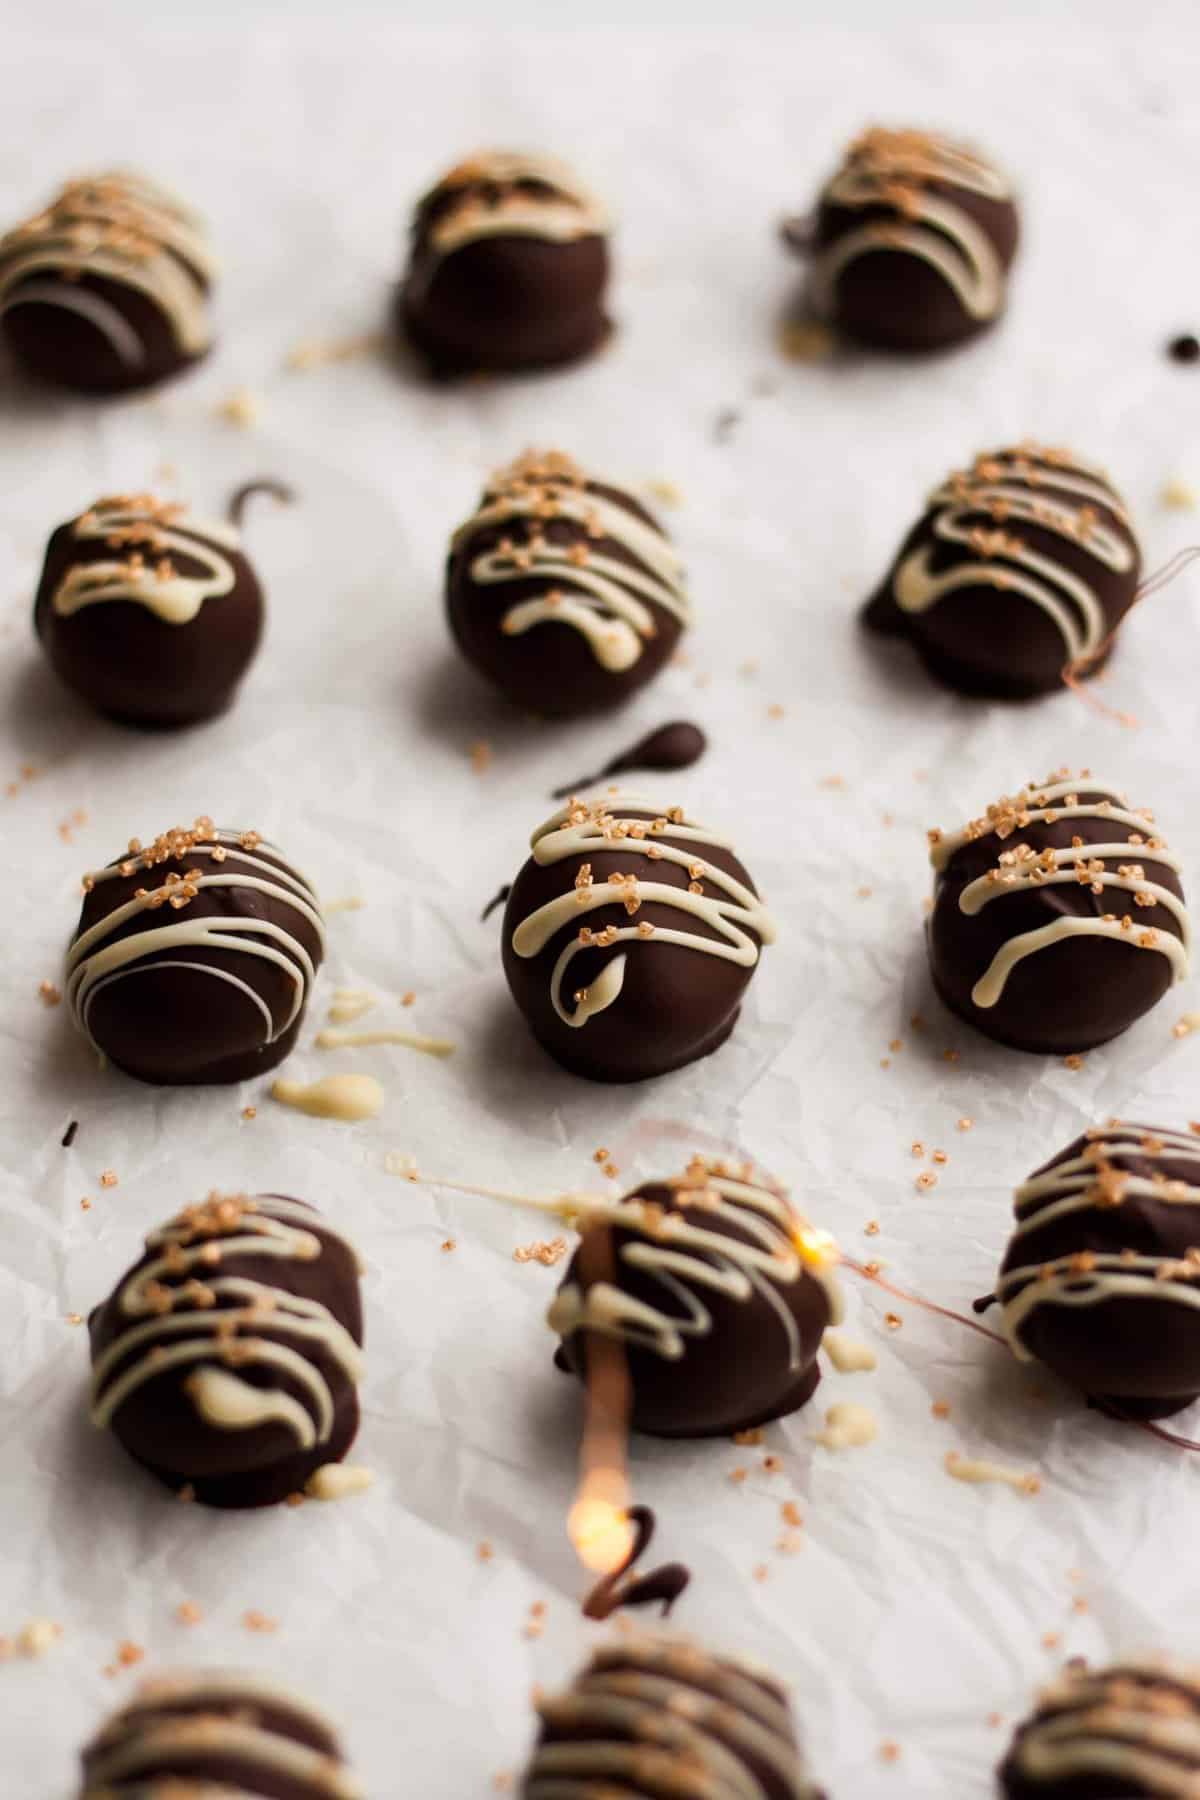 An array of twelve chocolate truffles coated in dark chocolate and white chocolate drizzle.